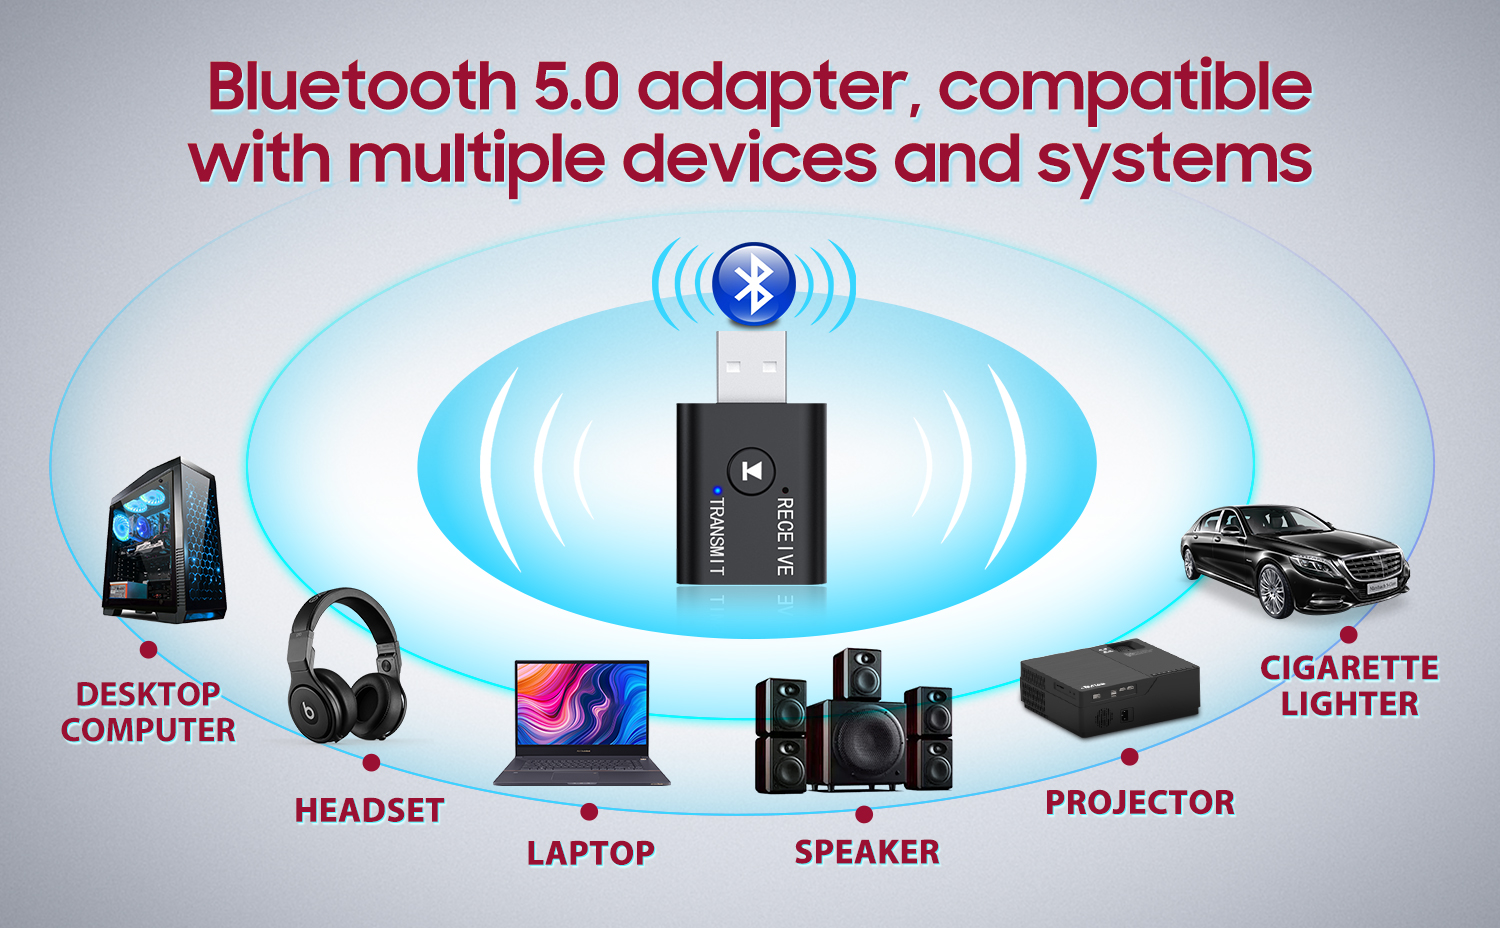 B2 USB BLUETOOTH TRANSMITTER CAN BE COMPATIBLE WITH MULTIPLE DEVICES AND SYSTEMS